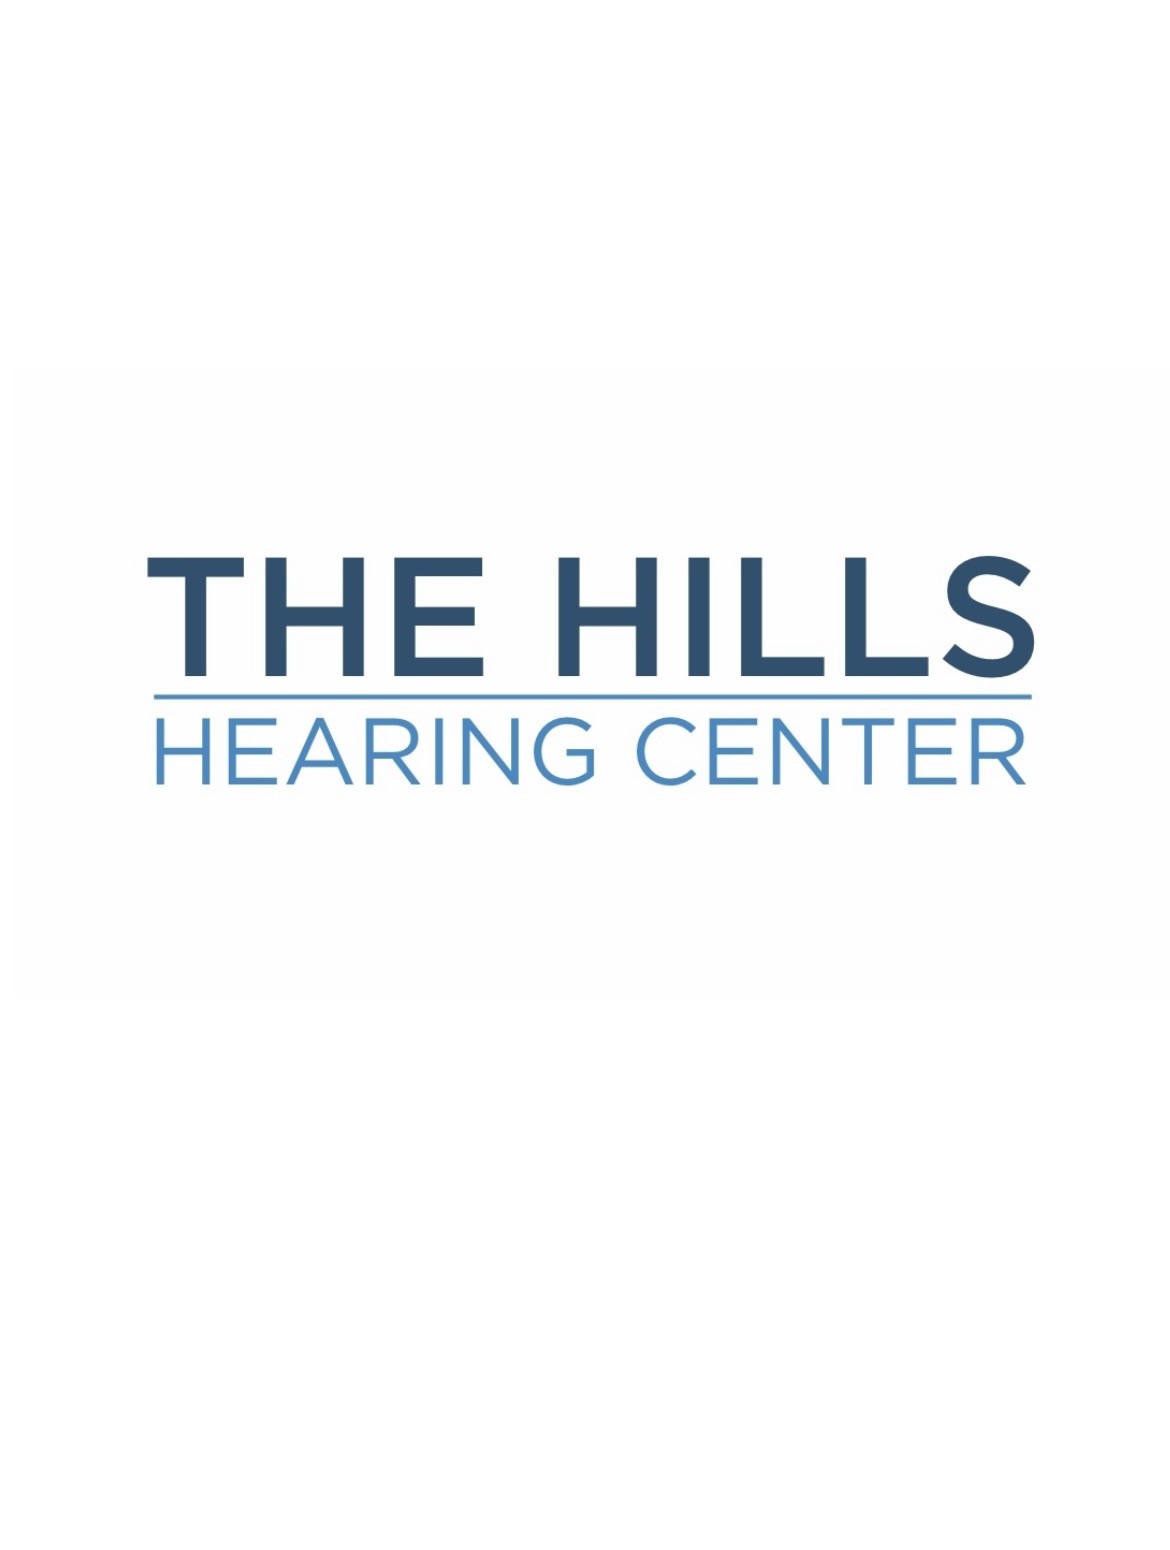 The Hills Hearing Center